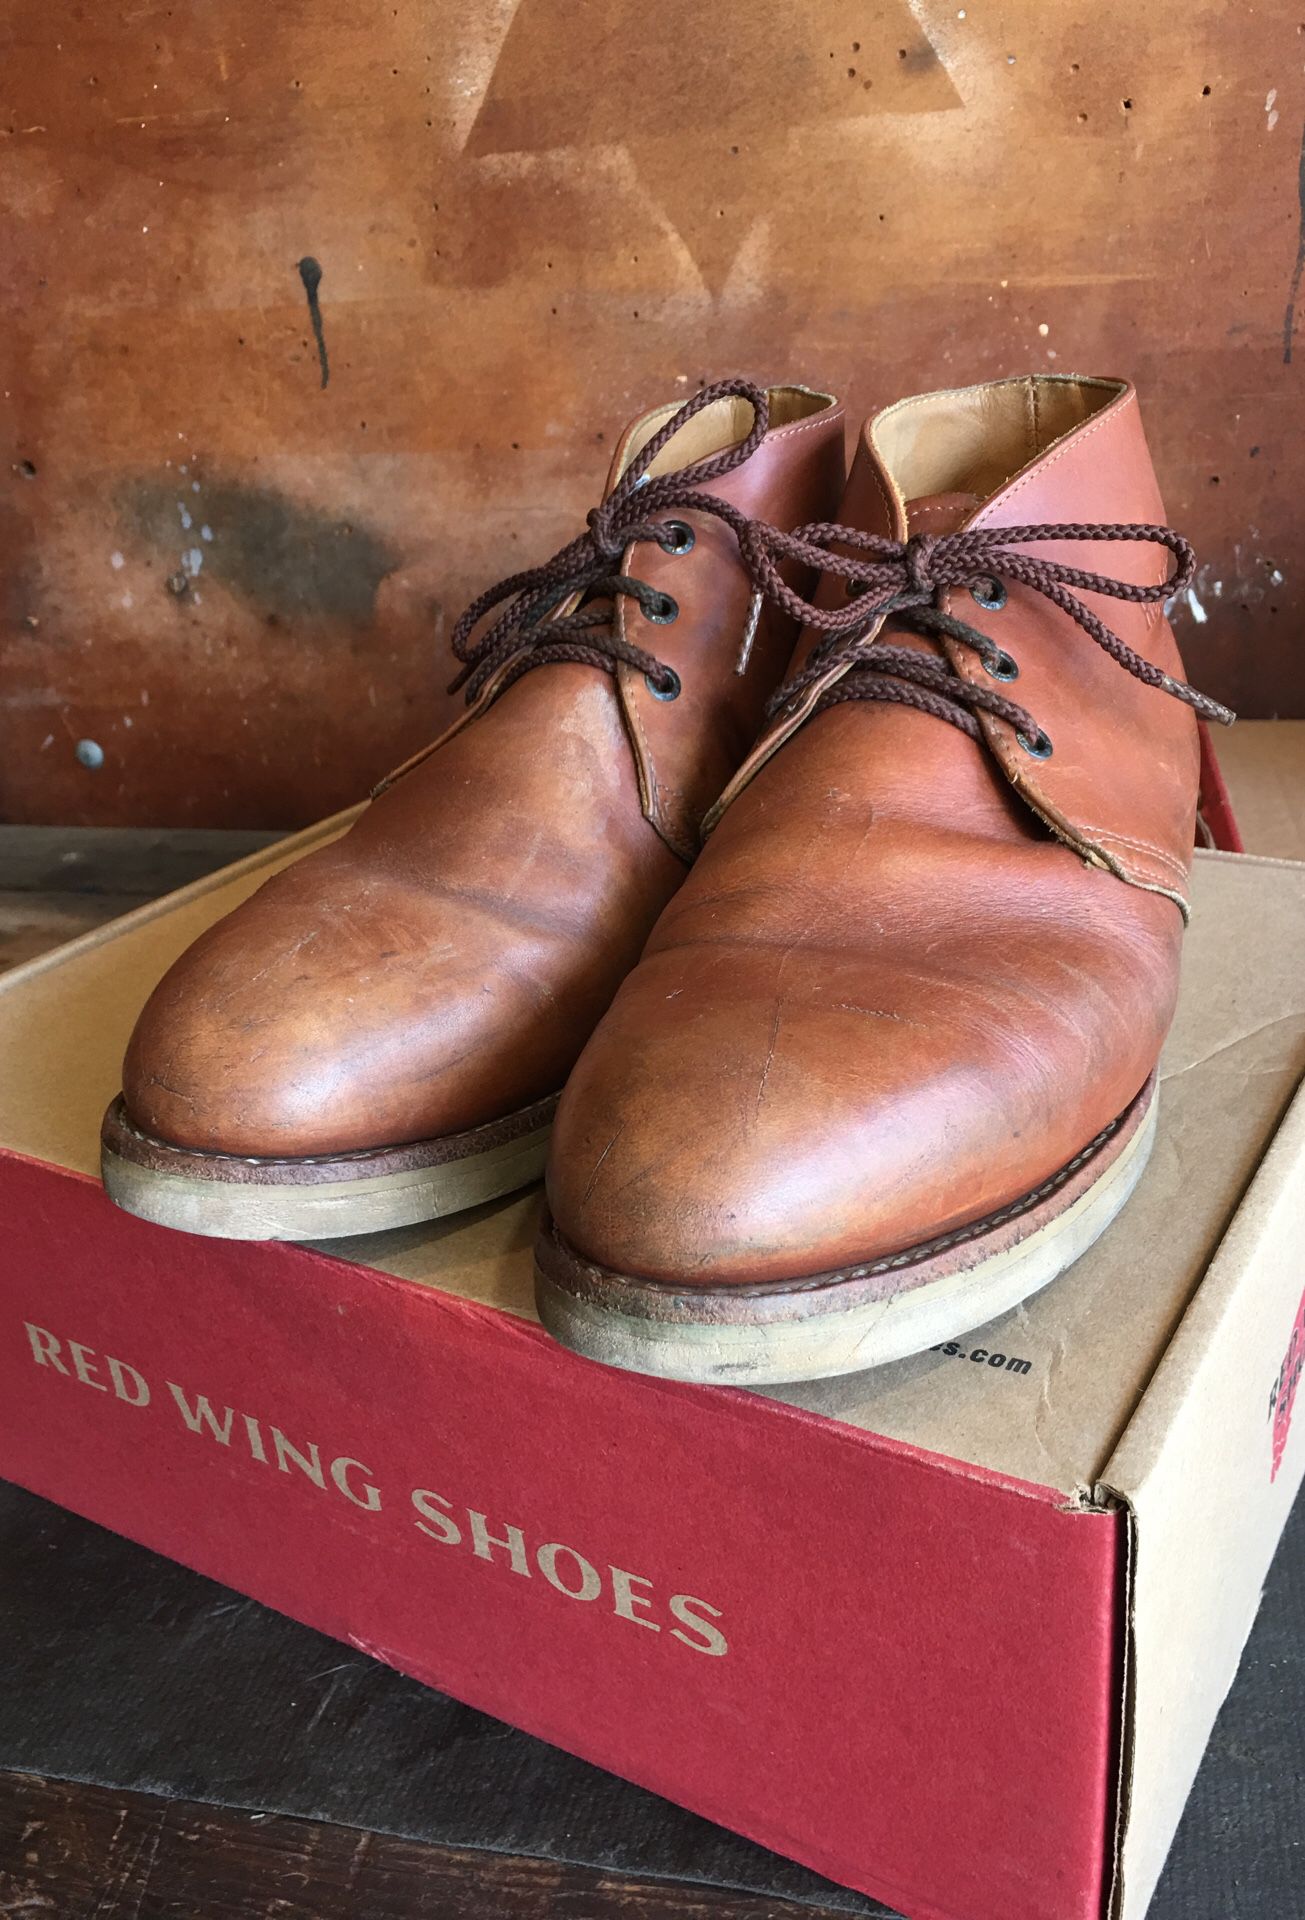 Red wing 595 boots